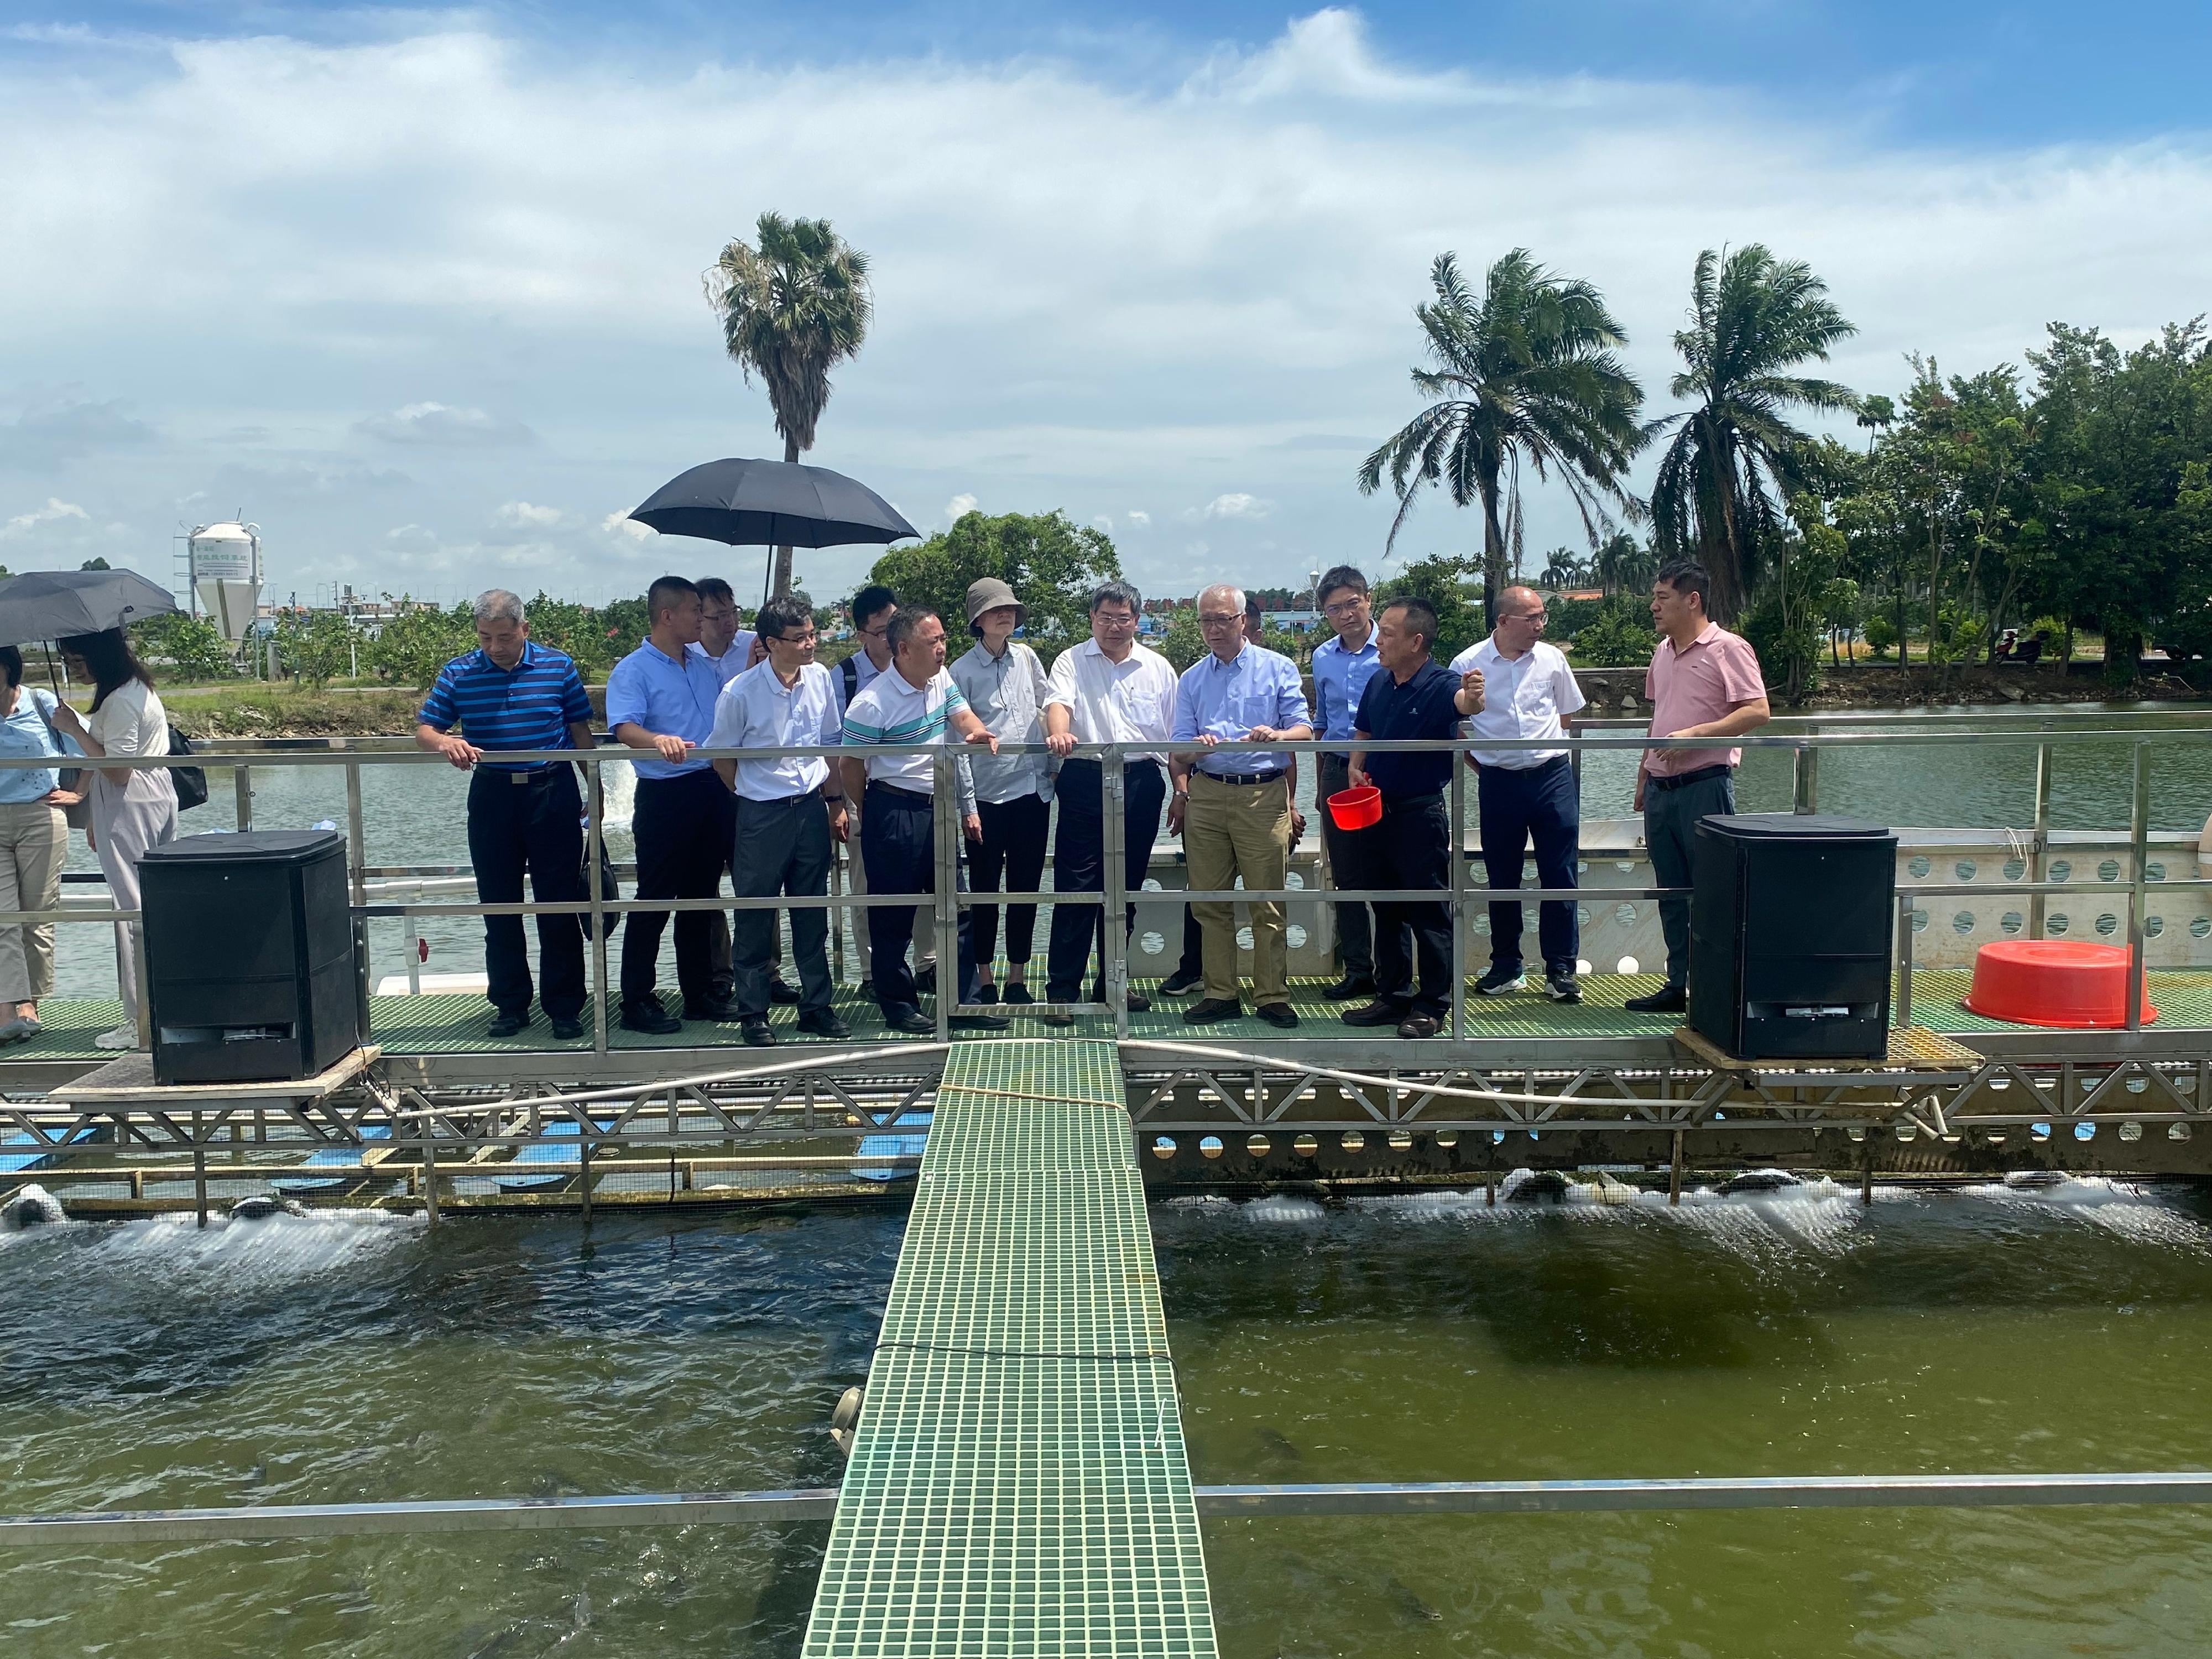 The Secretary for Environment and Ecology, Mr Tse Chin-wan, visited the Guangdong International Fishery High Tech Park yesterday afternoon (July 19). Photo shows Mr Tse (fifth right); the Permanent Secretary for Environment and Ecology (Food), Miss Vivian Lau (seventh right); and the Director of Agriculture, Fisheries and Conservation, Dr Leung Siu-fai (sixth right), receiving a briefing from a representative on the farming system adopted in the Park.